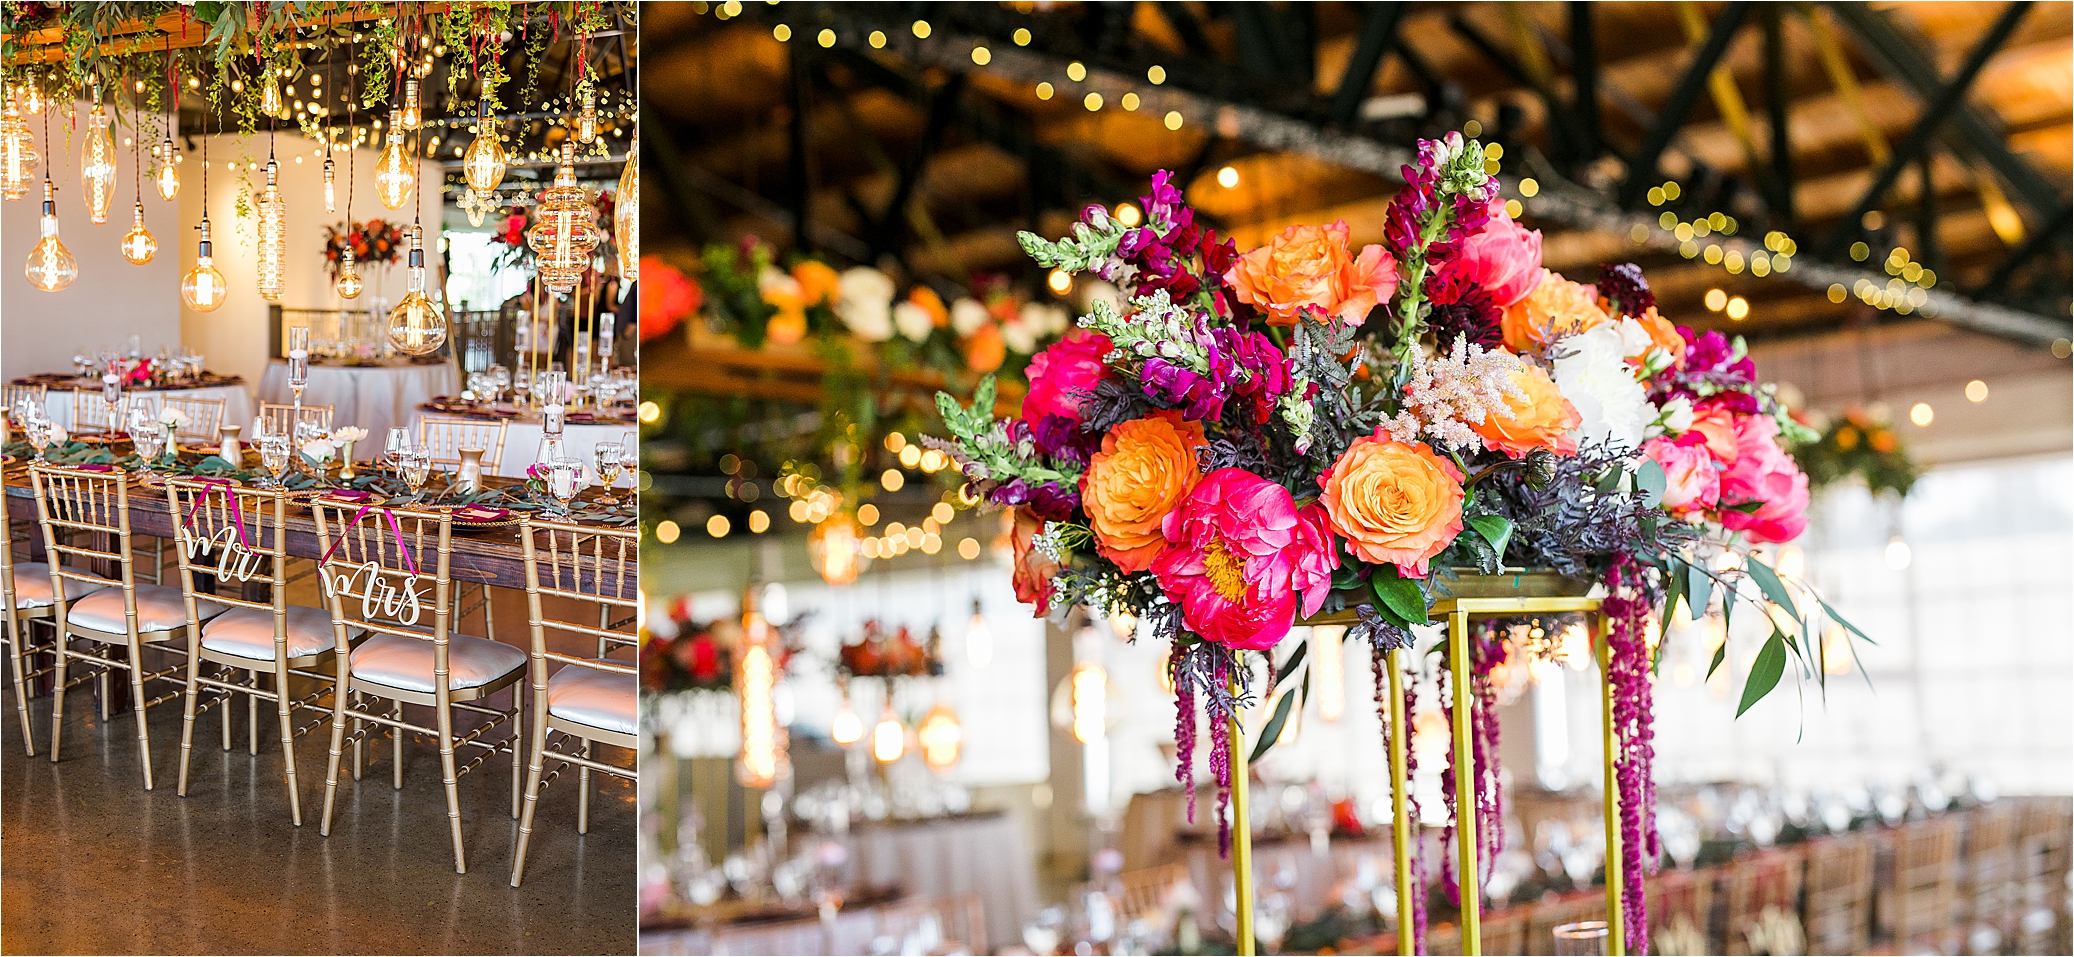 Lush Florals with reds, oranges, whites and maroons by San Antonio Wedding Photographer Jillian Hogan 